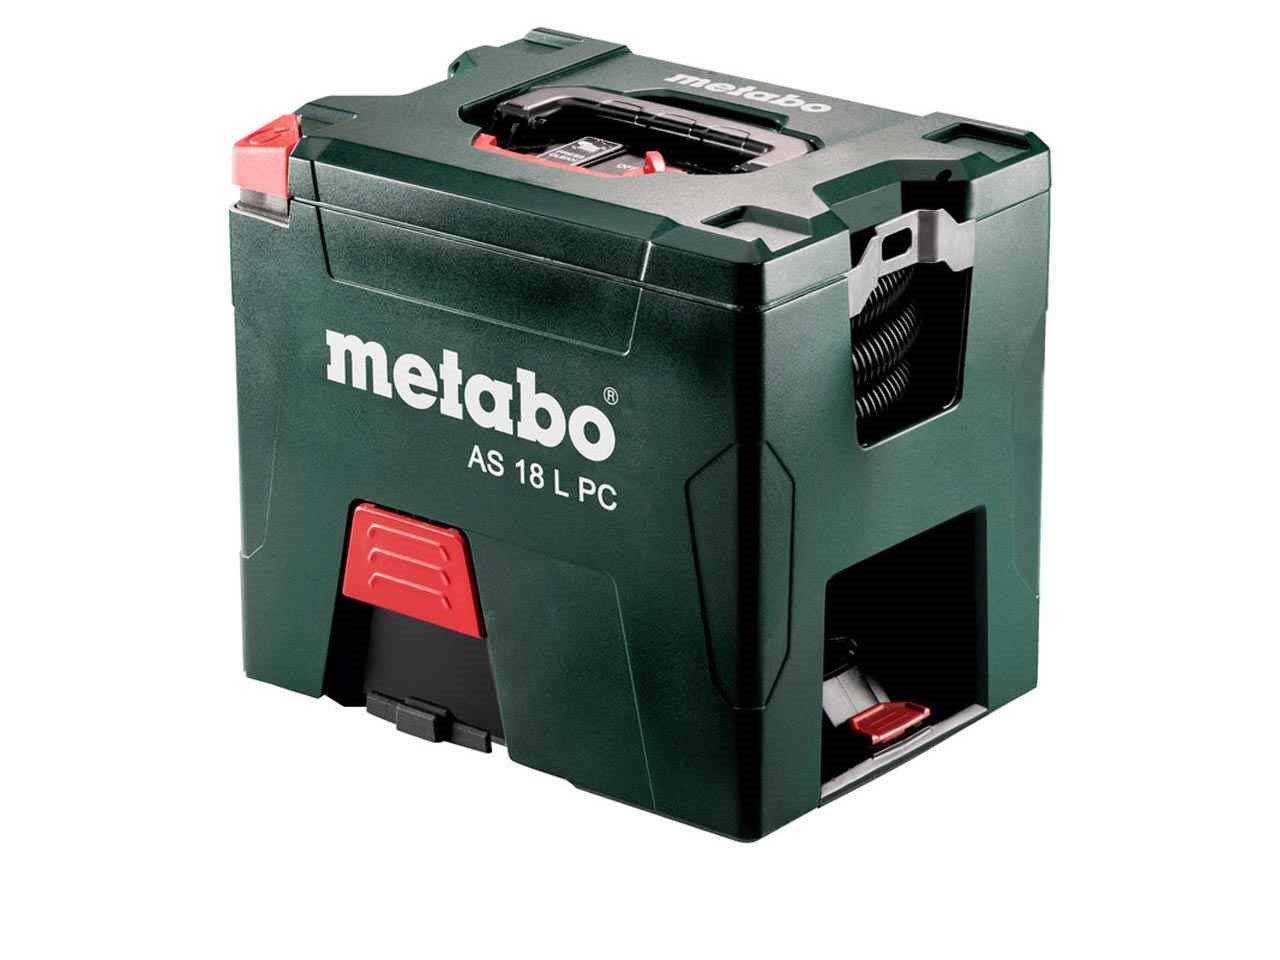 metabo-as-18-l-pc-18v-li-ion-l-class-vacuum-cleaner-body-only